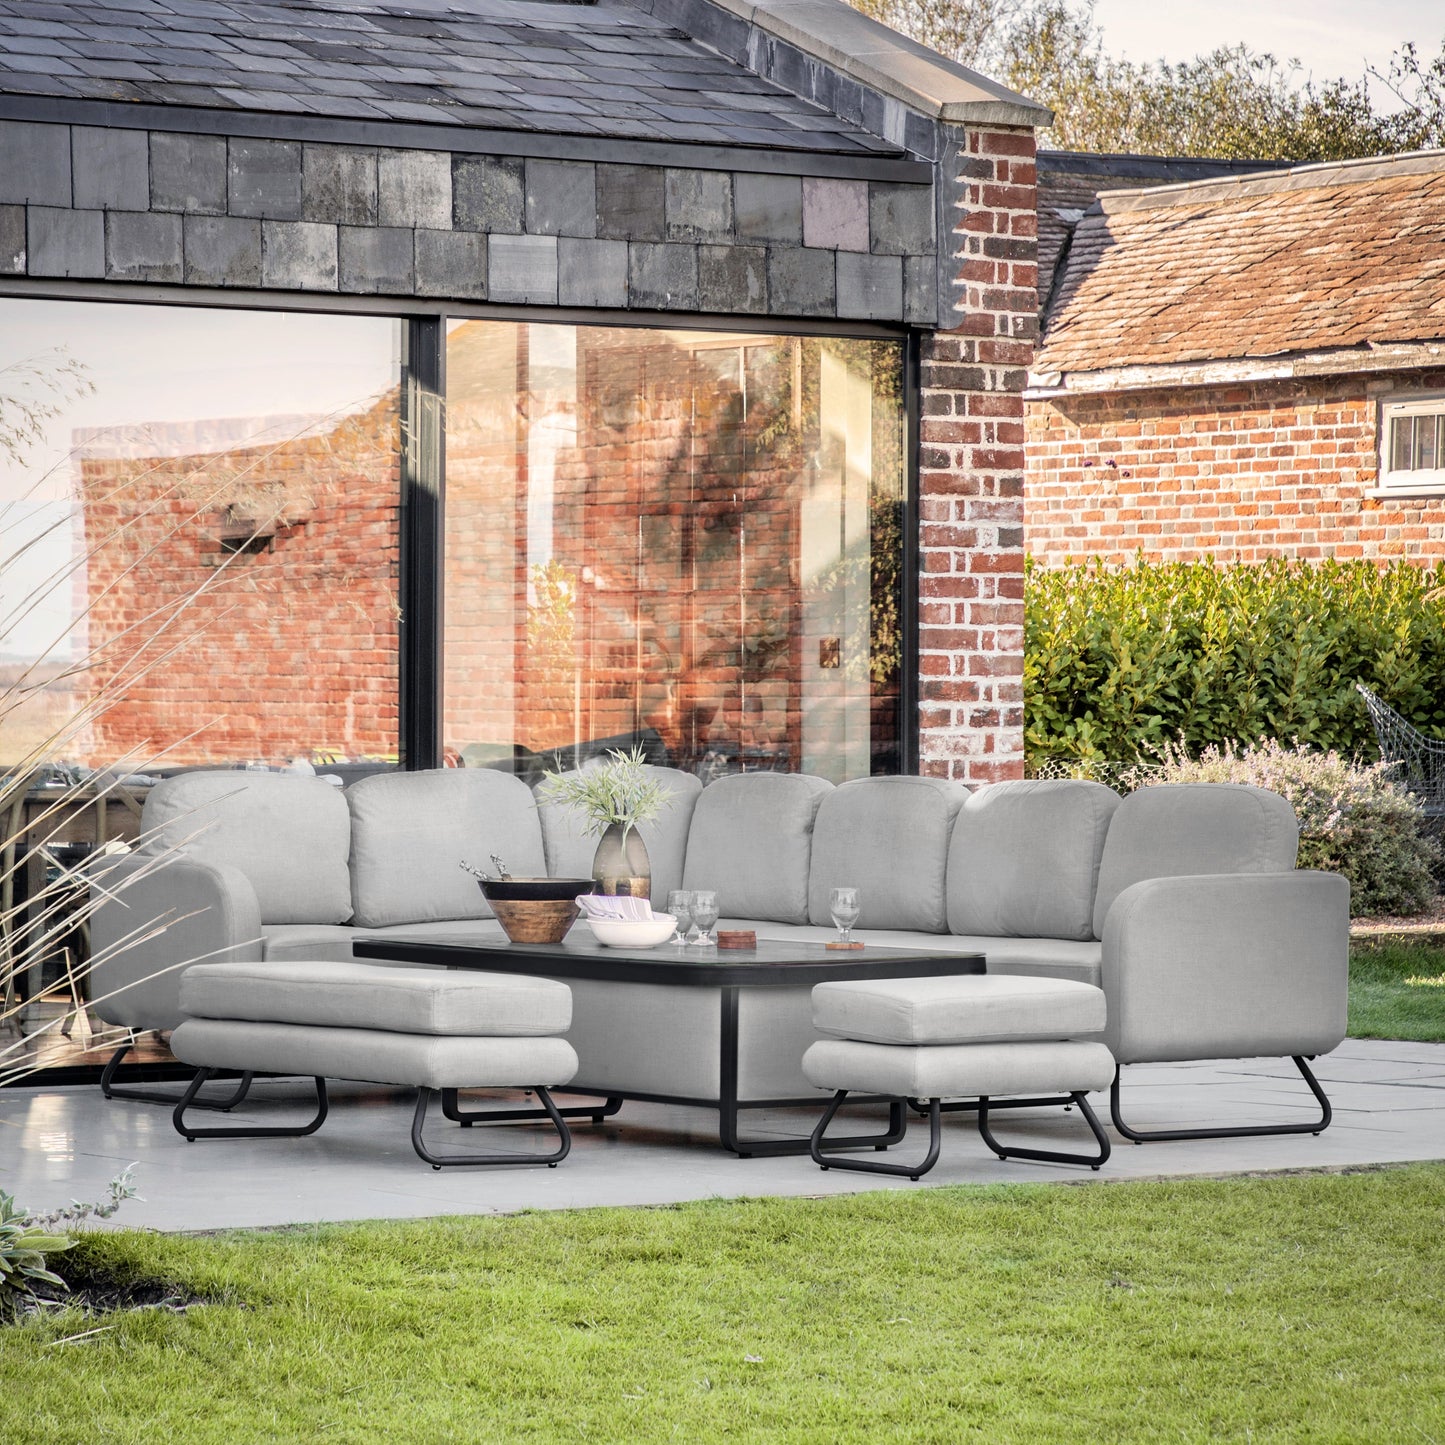 A grey Topsham Rectangle Dining Set Rising Table Slate sectional sofa set in a garden from Kikiathome.co.uk, perfect for interior decor.